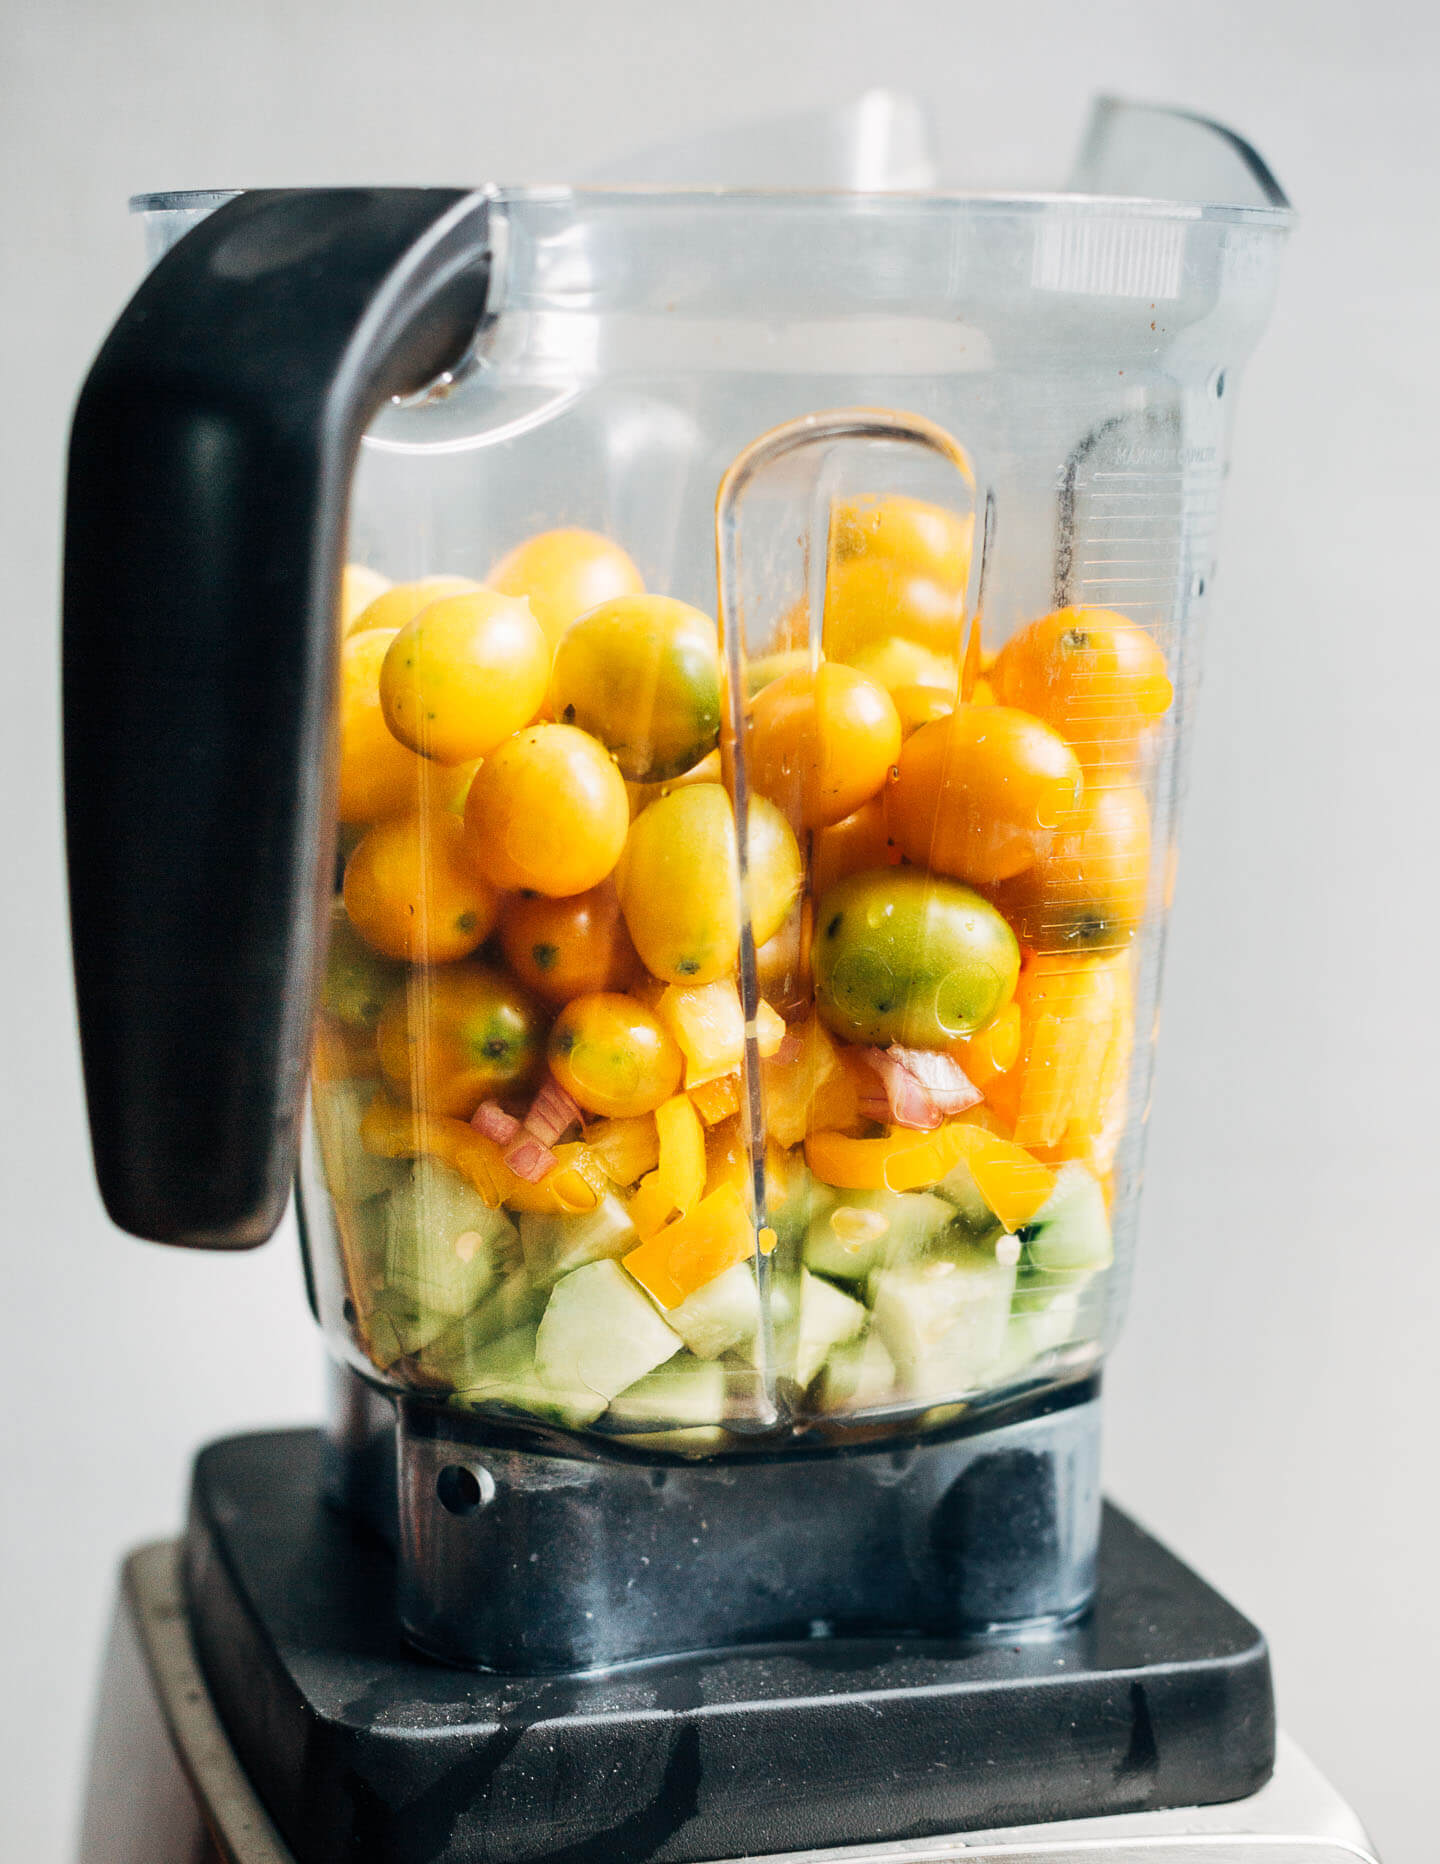 A blender filled with gazpacho ingredients